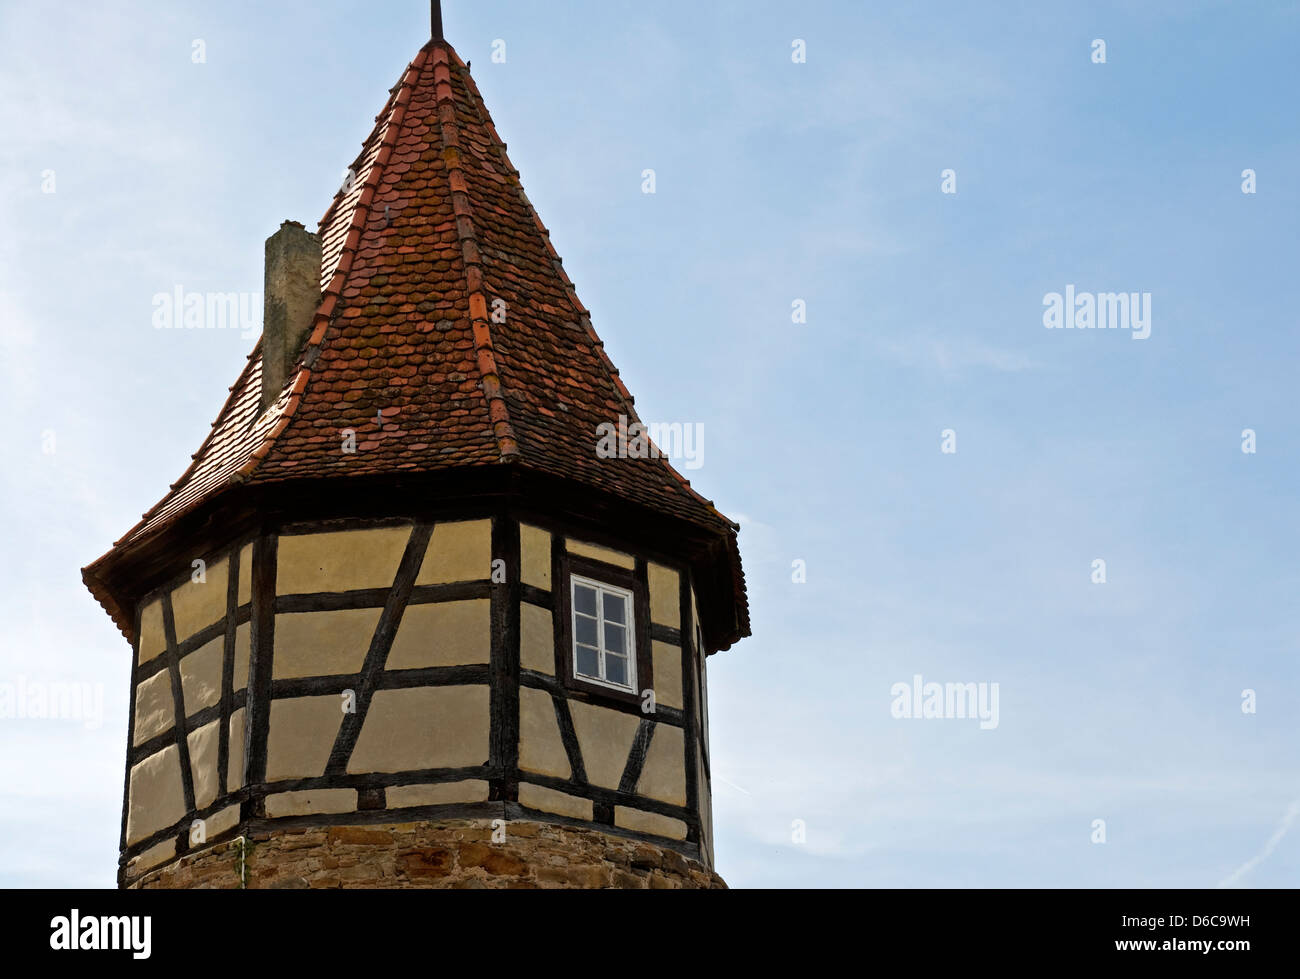 Medieval tower which forms part of the town fortifications, Prichsenstadt, Franconia, Bavaria, Germany. Stock Photo